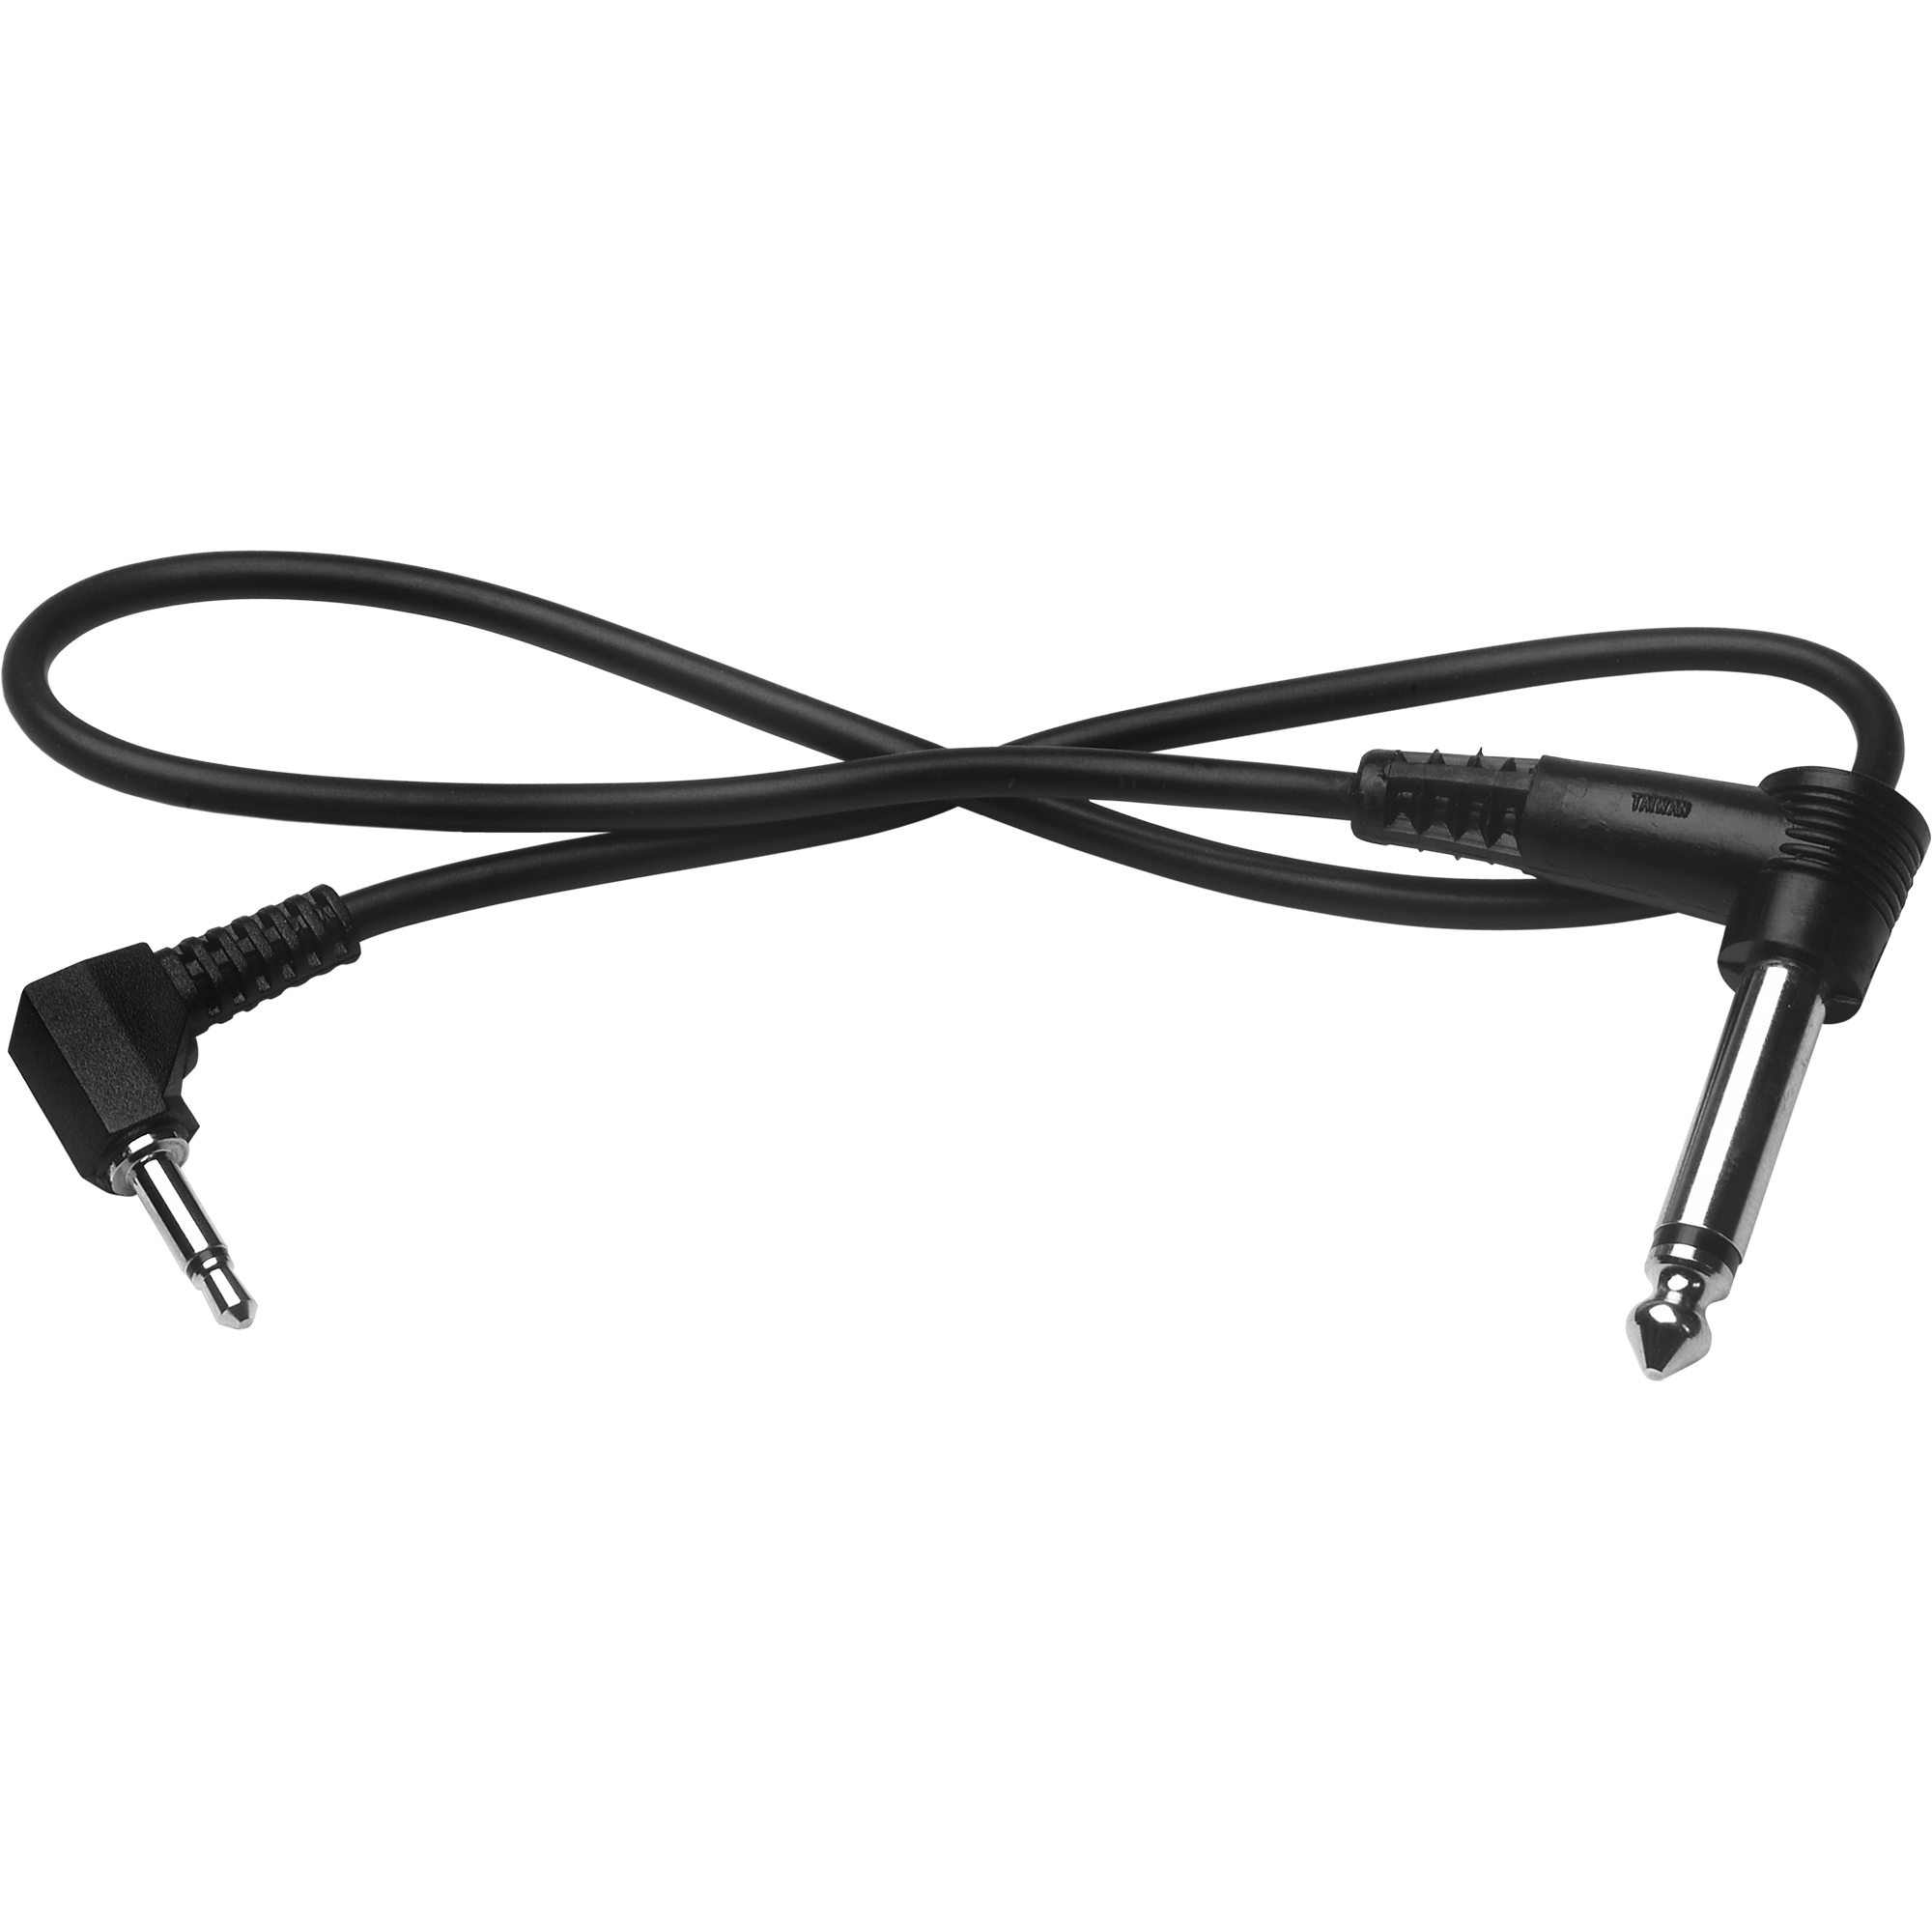 16' Off-Camera Flash Extension Cord 3.5mm to 3.5mm Miniphone 